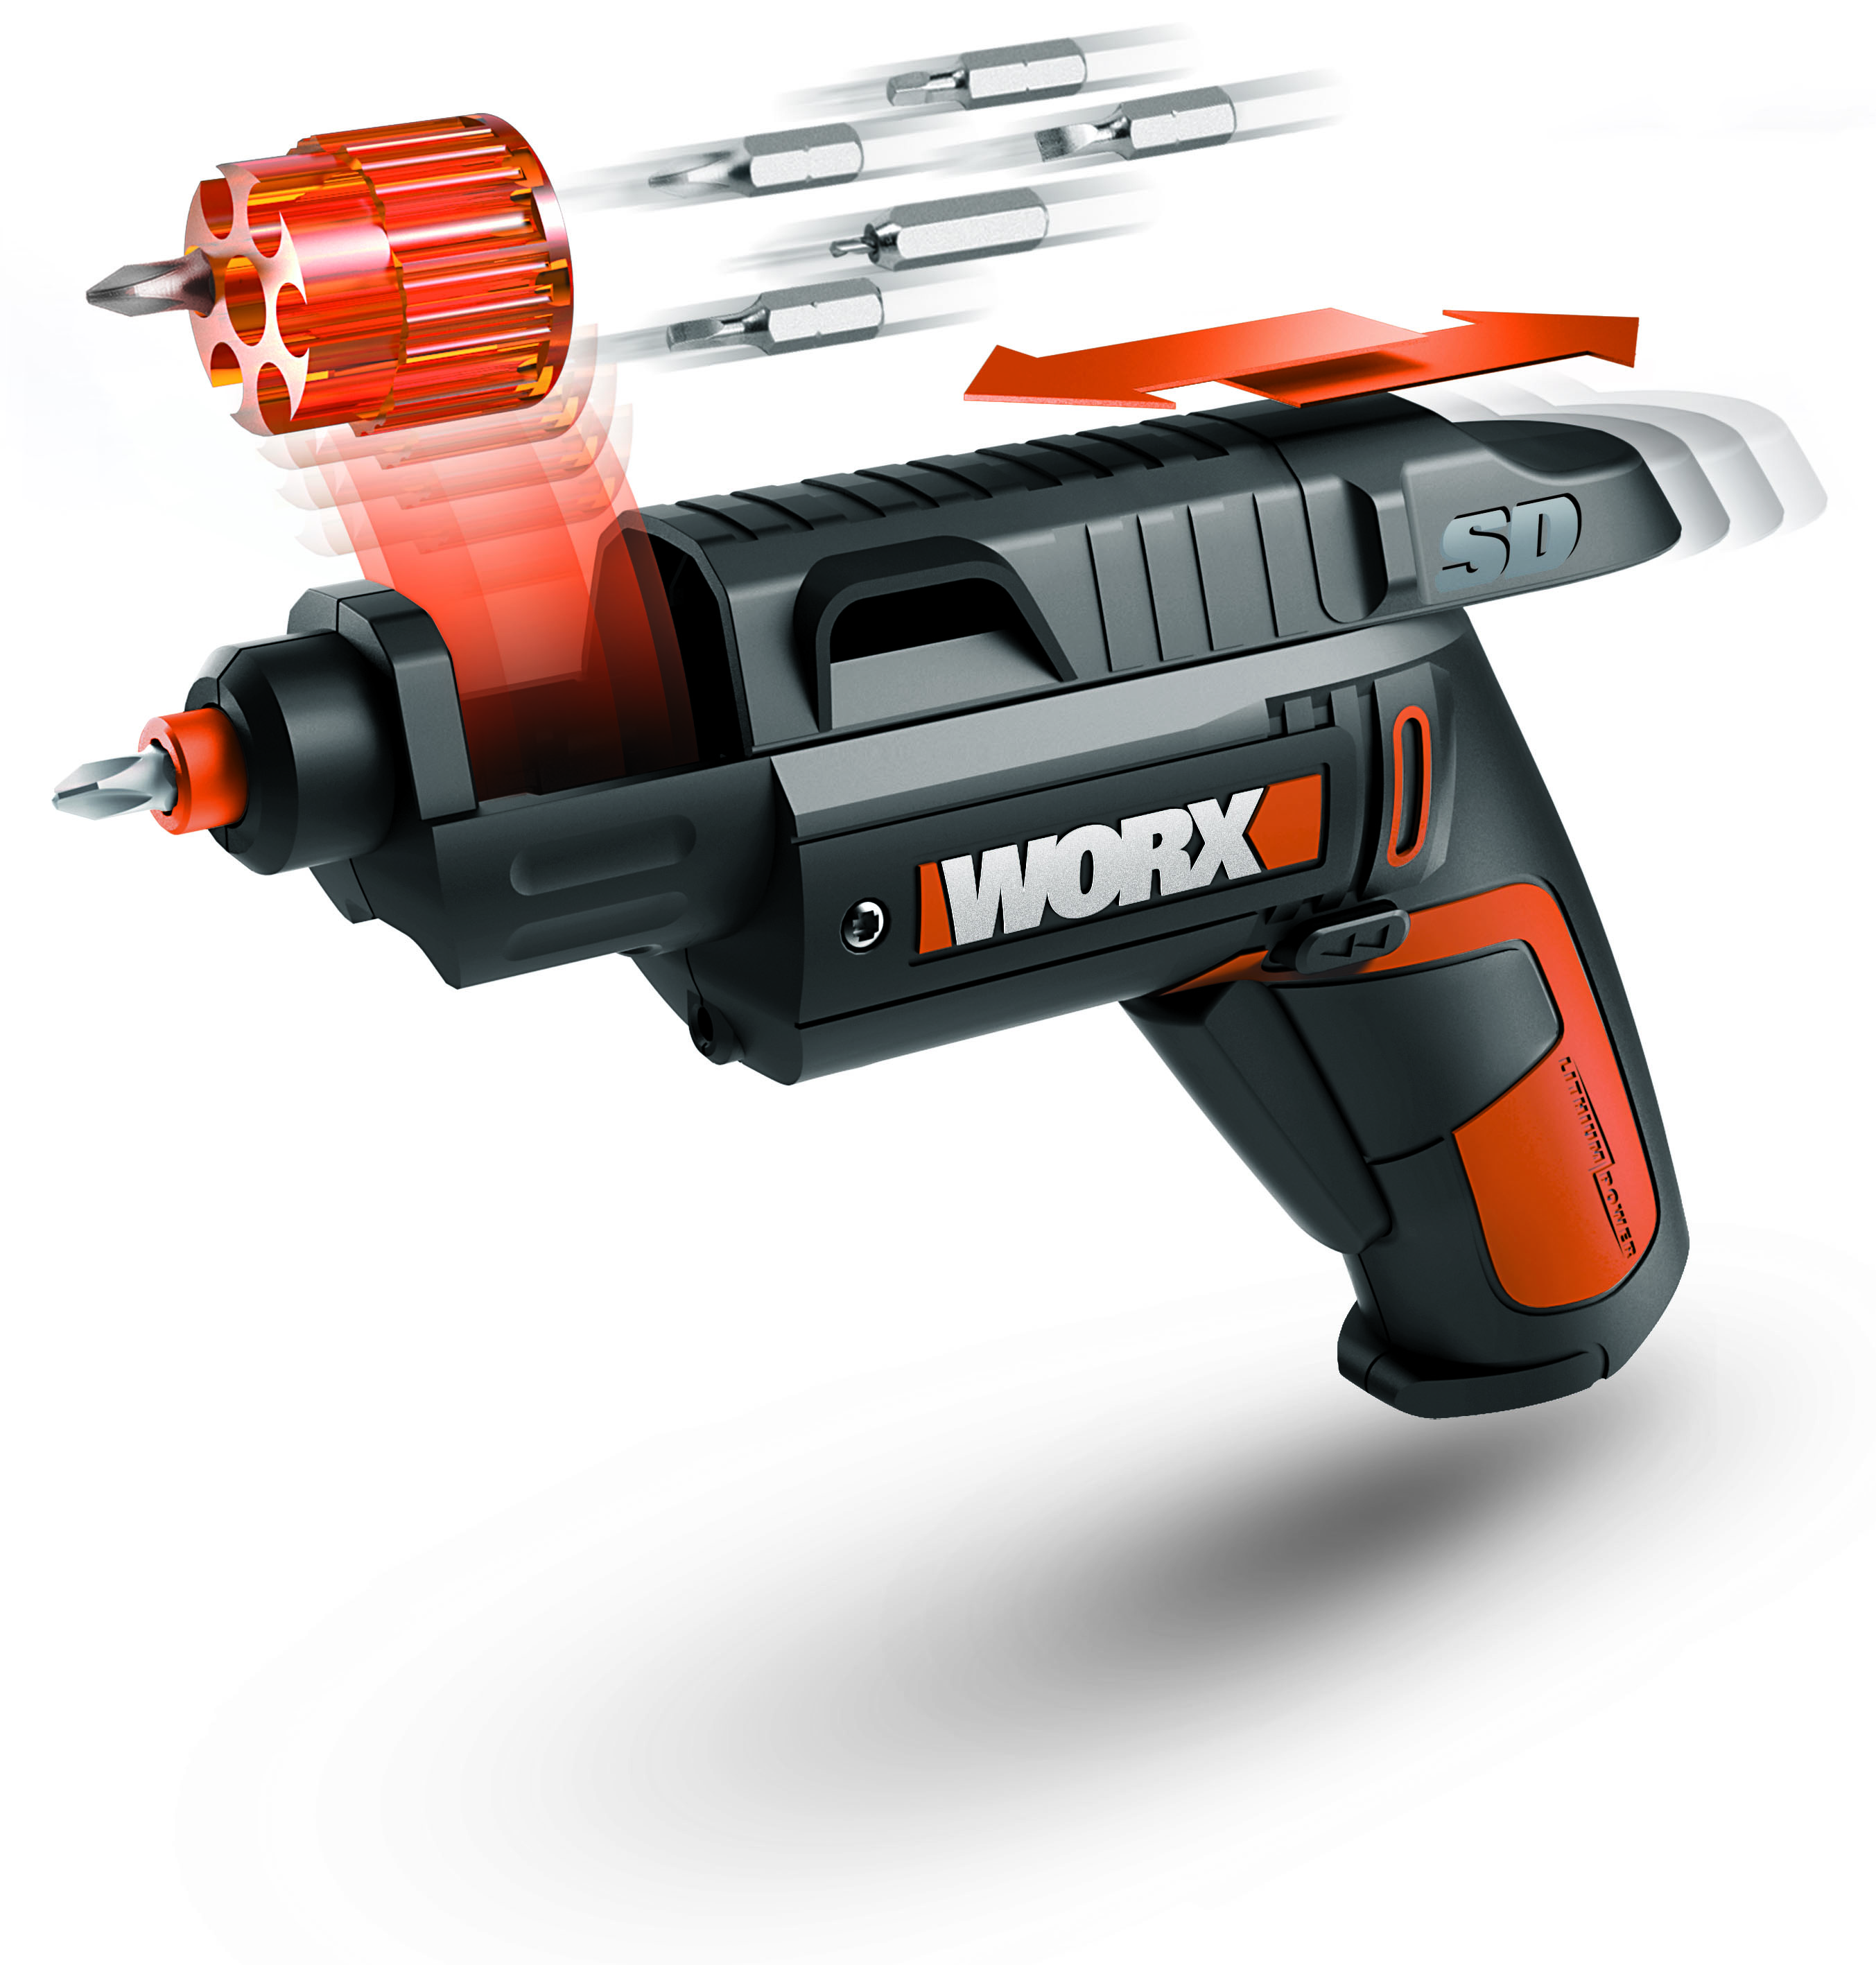 WORX SD SemiAutomatic Driver with six-slot revolving chamber gets jobs done quickly.